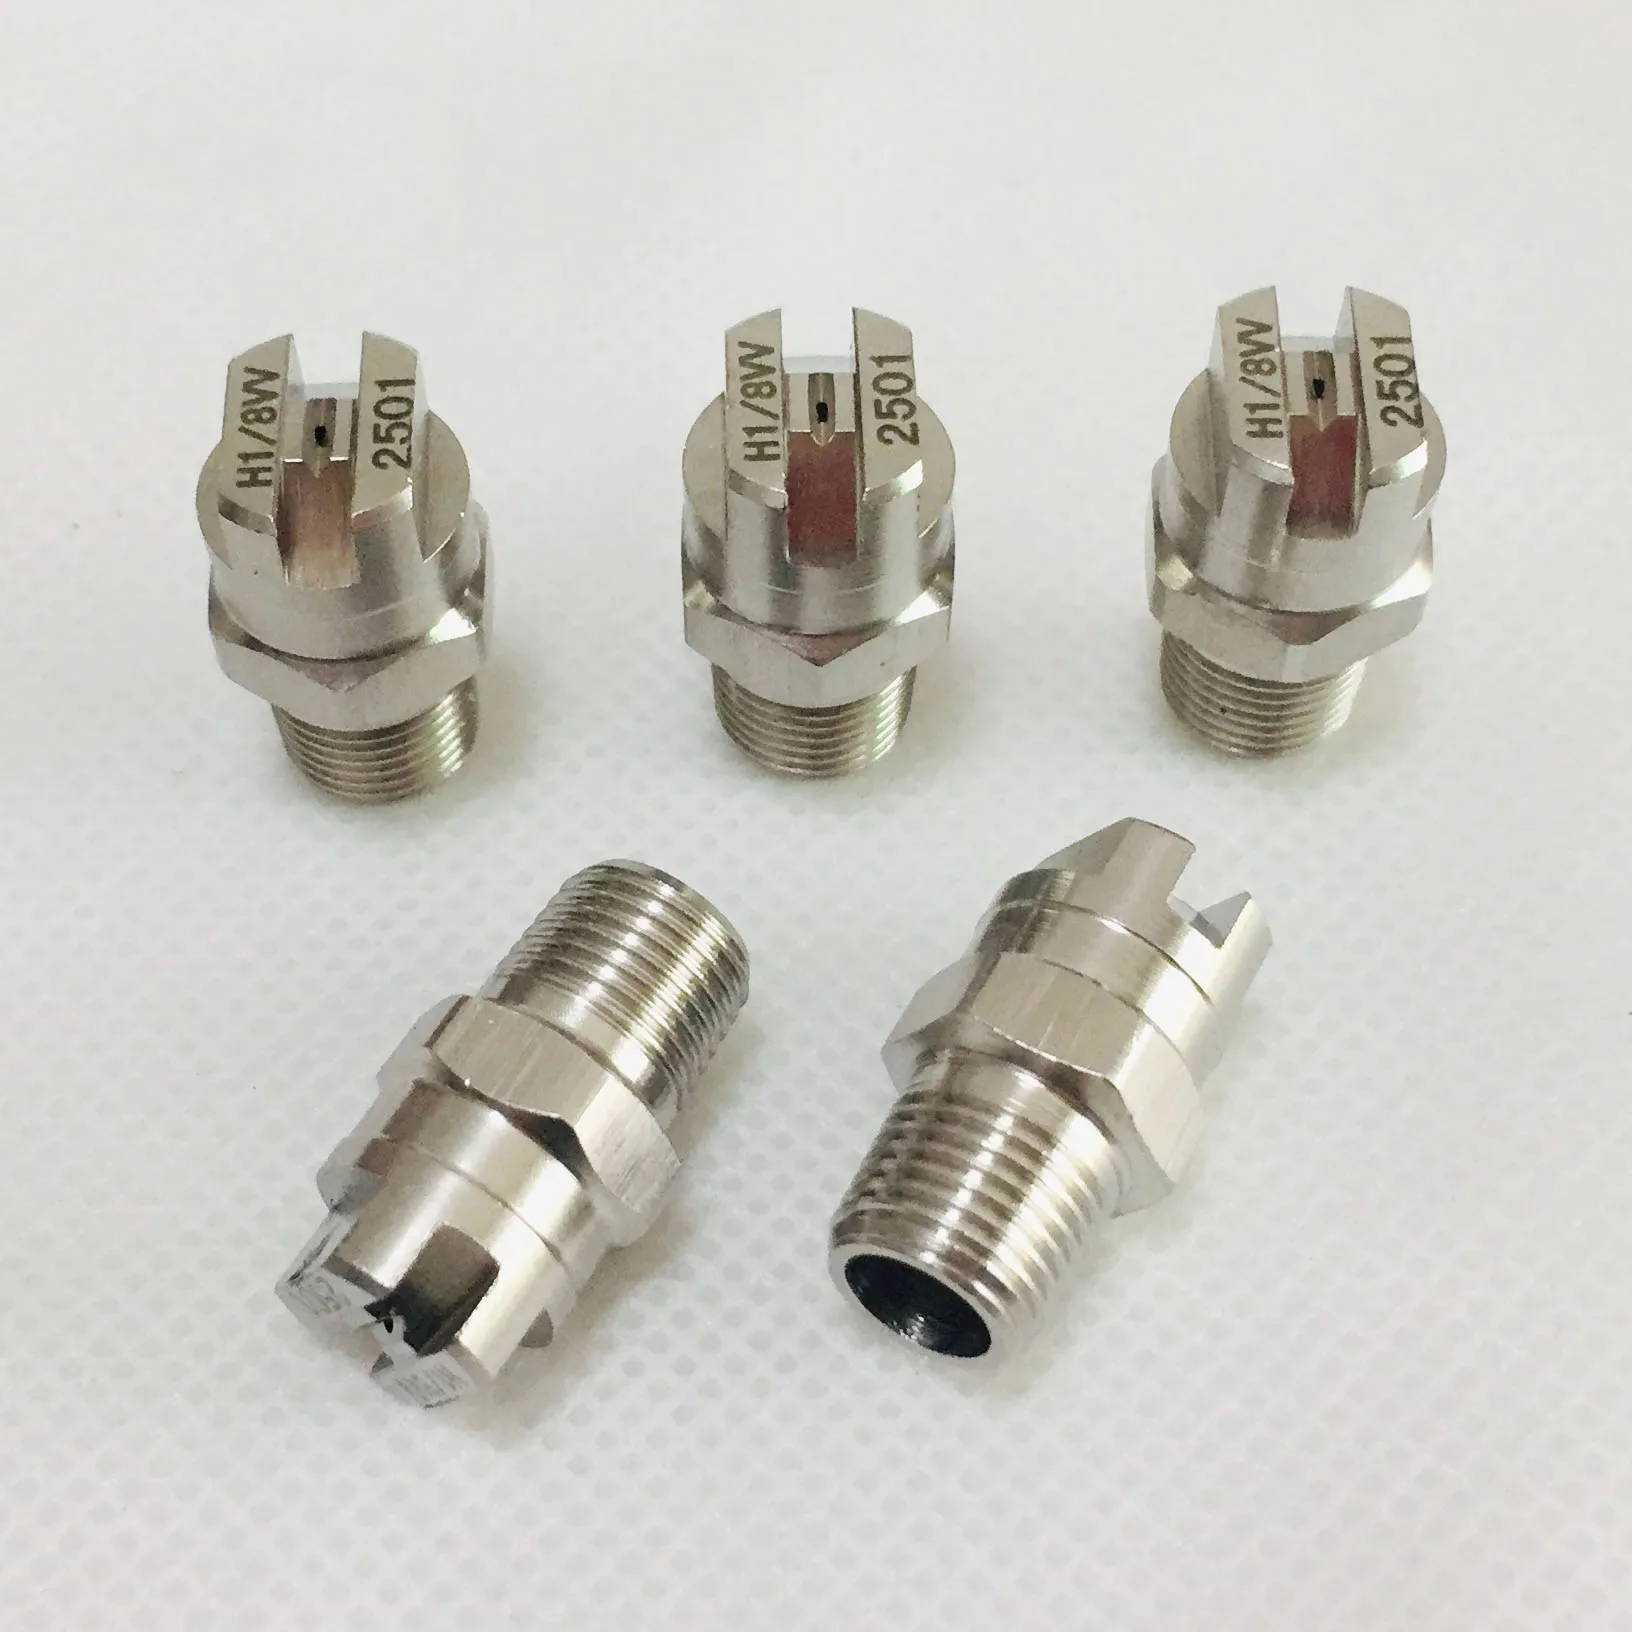 10pcs/lot 1/8" BSPT 25/40 degree SS304 vee jet flat fan spray nozzle, Industrial / factory cleaning, dust removal nozzle